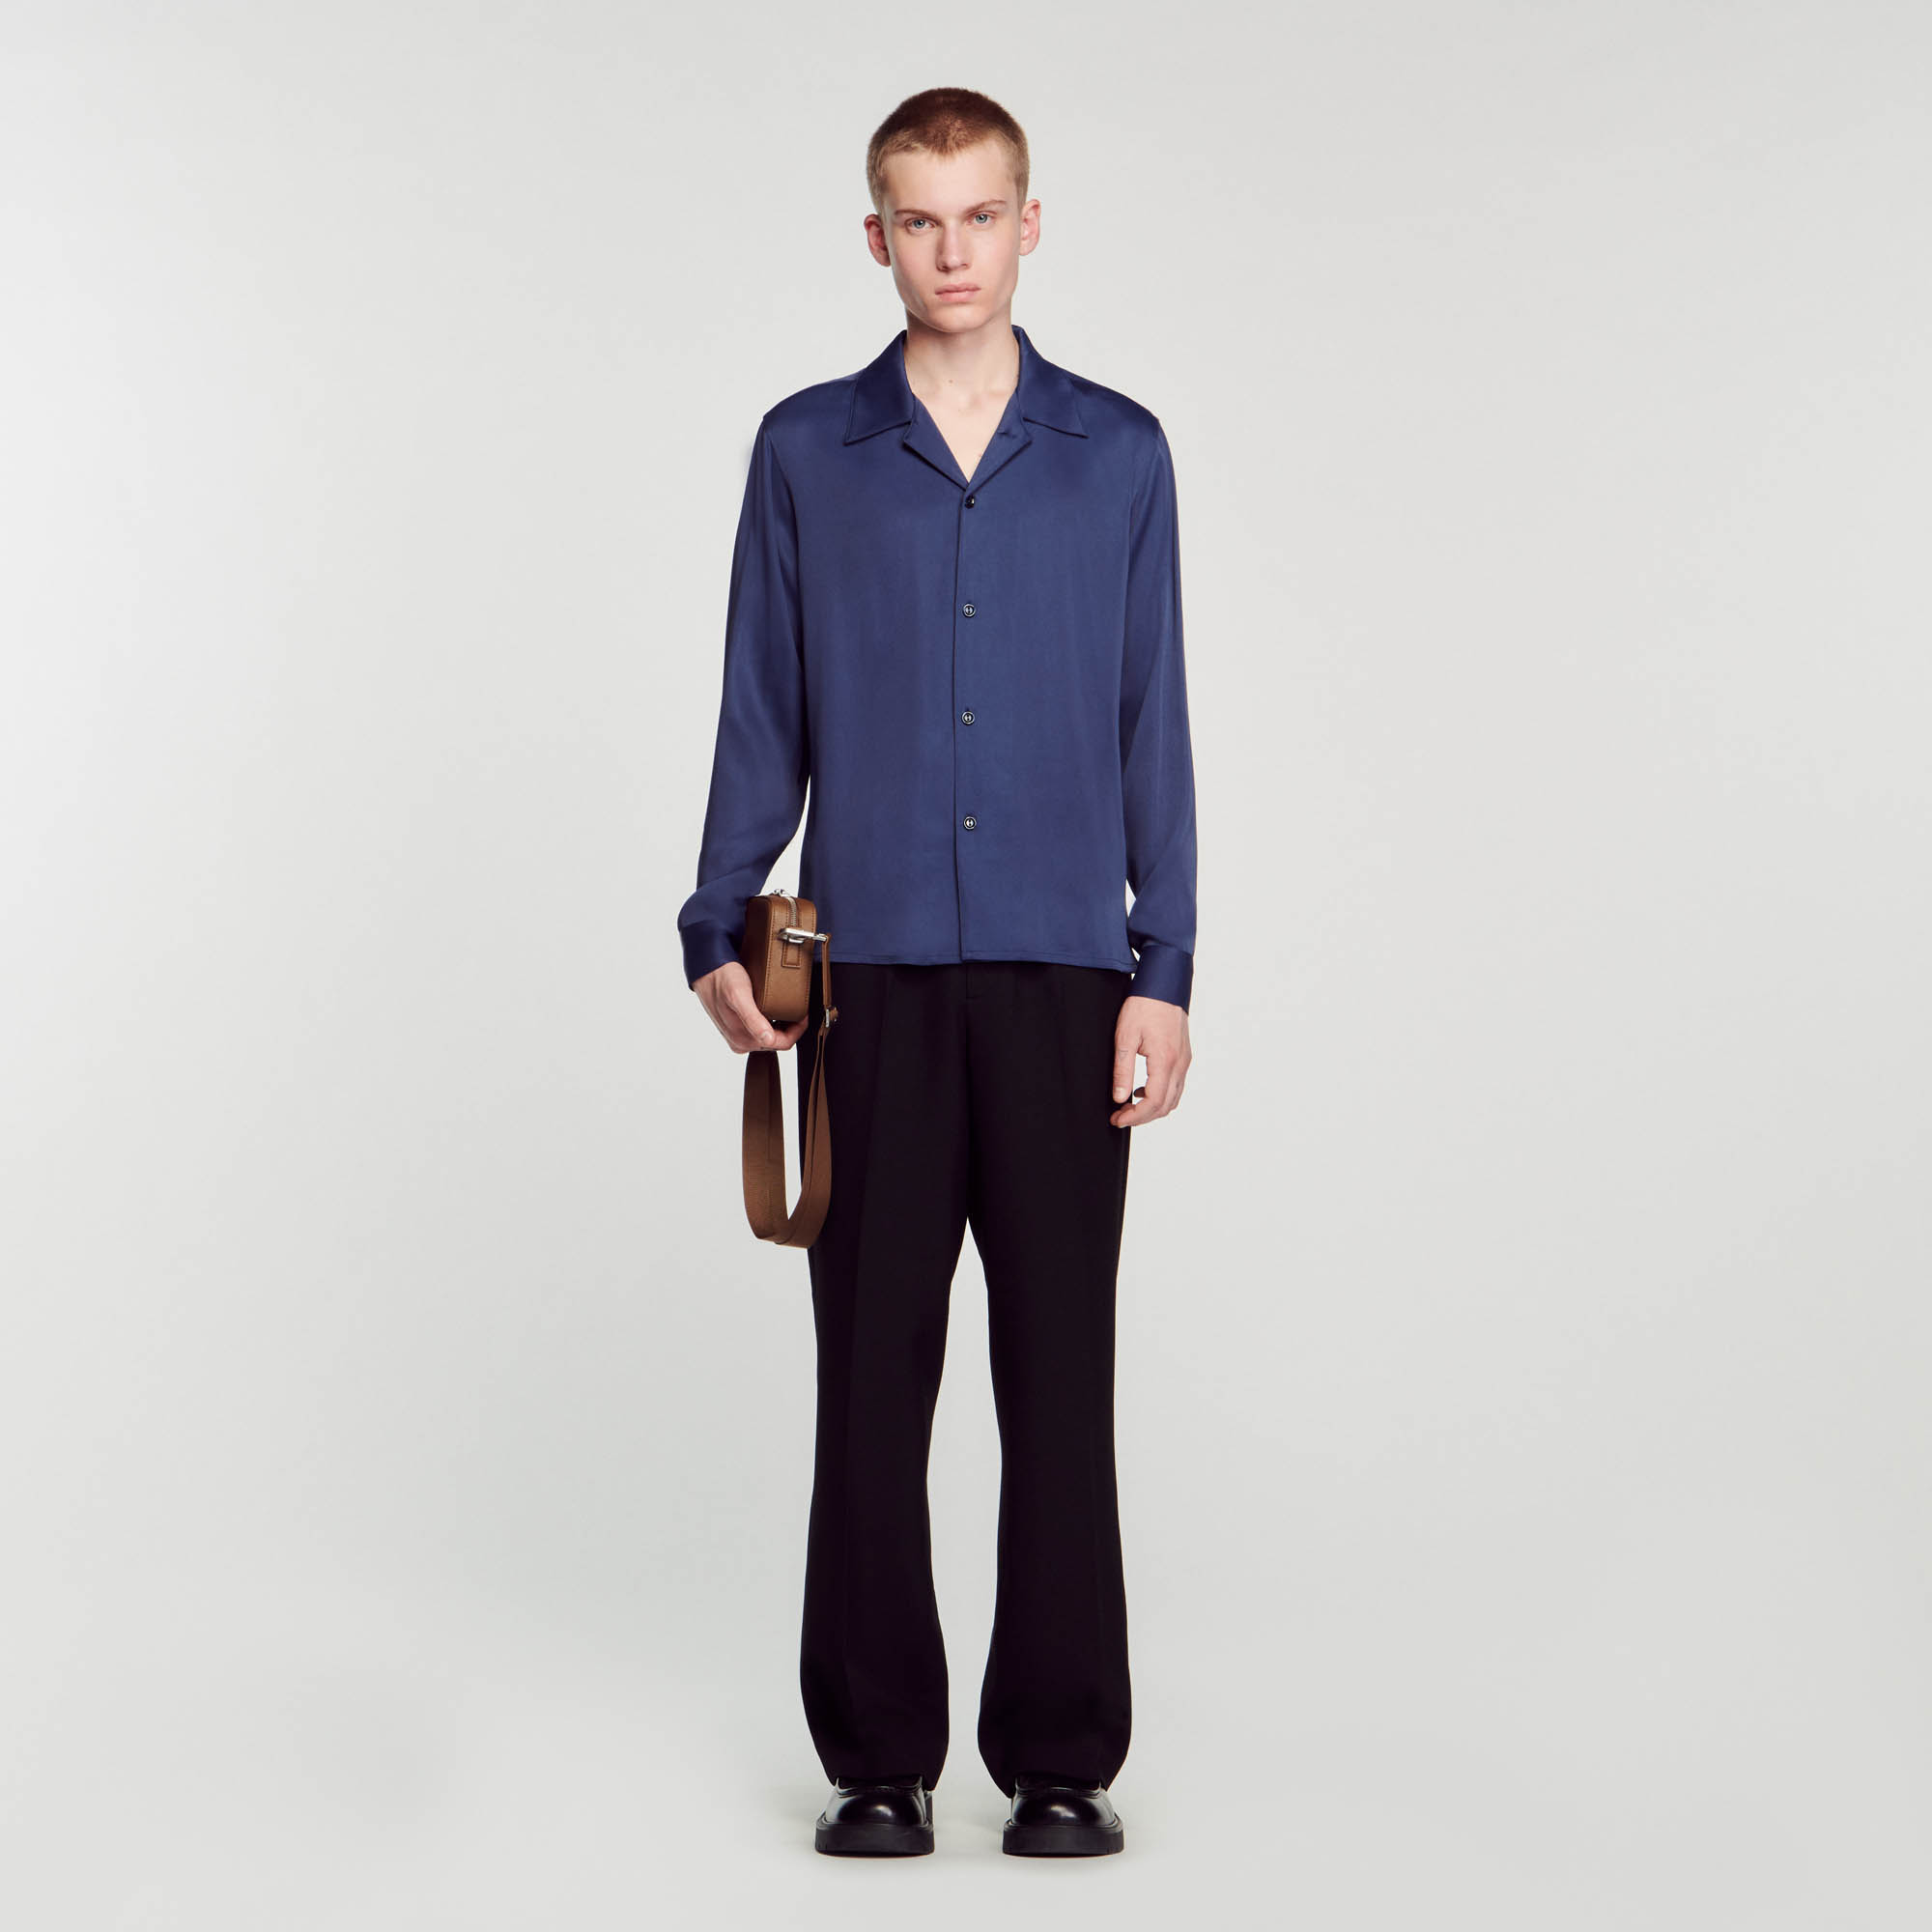 Sandro acetate Flowing shirt with a spread collar, long sleeves, and a button fastening